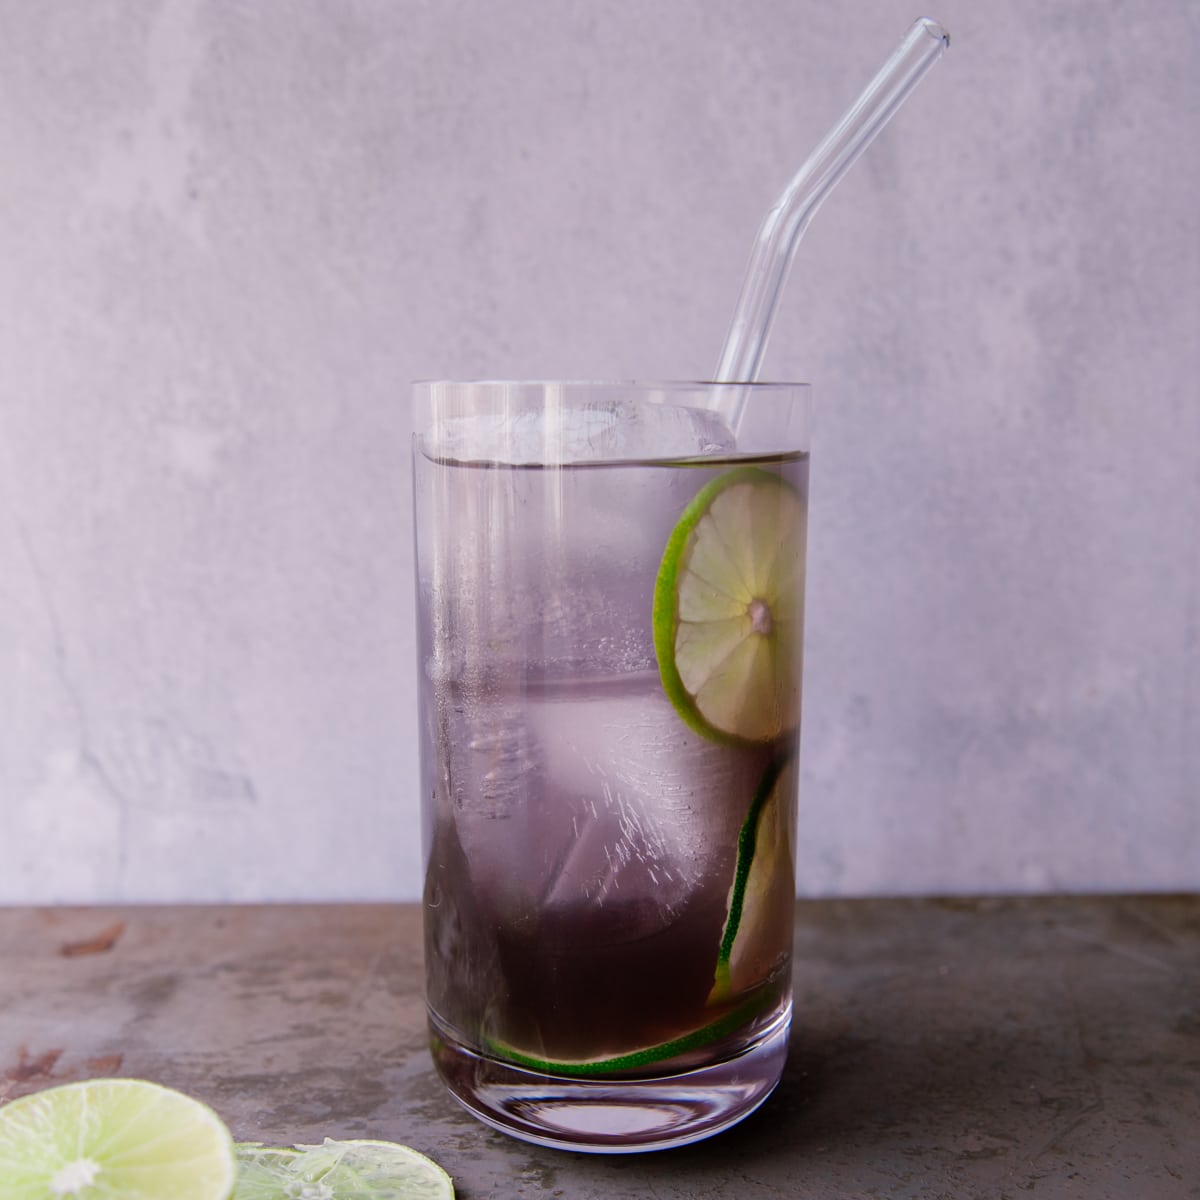 A purple rain cocktail in a tall cocktail glass. It's light purple in color and garnished with slices of lime. There is a clear straw in the glass.